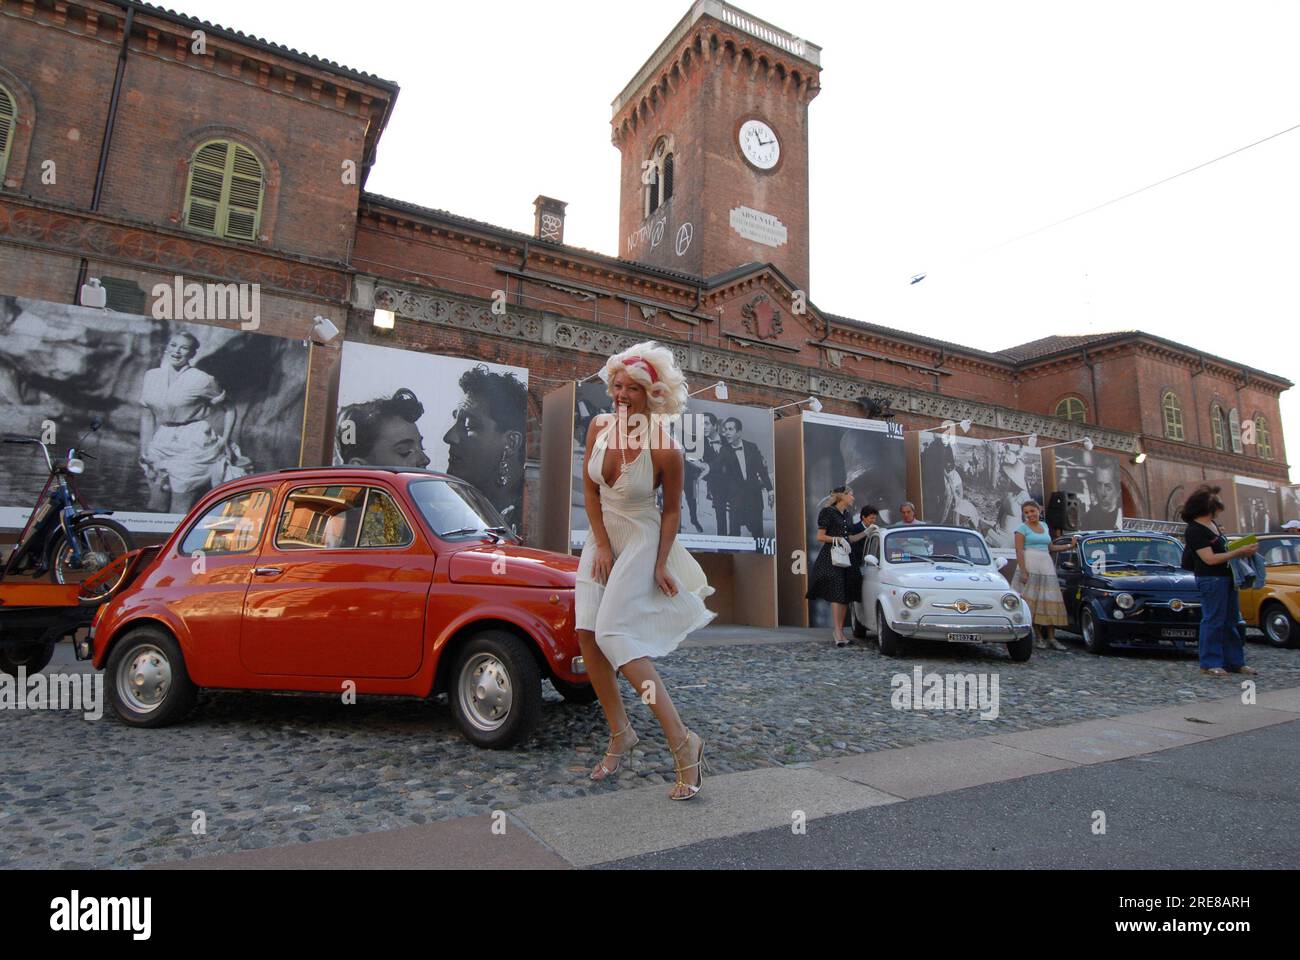 Torino, Italy - July 2007: Holyday in Turin for the launch event of the new Fiat 500. In 2007, the 50th anniversary of the Nuova 500's launch, Fiat la Stock Photo